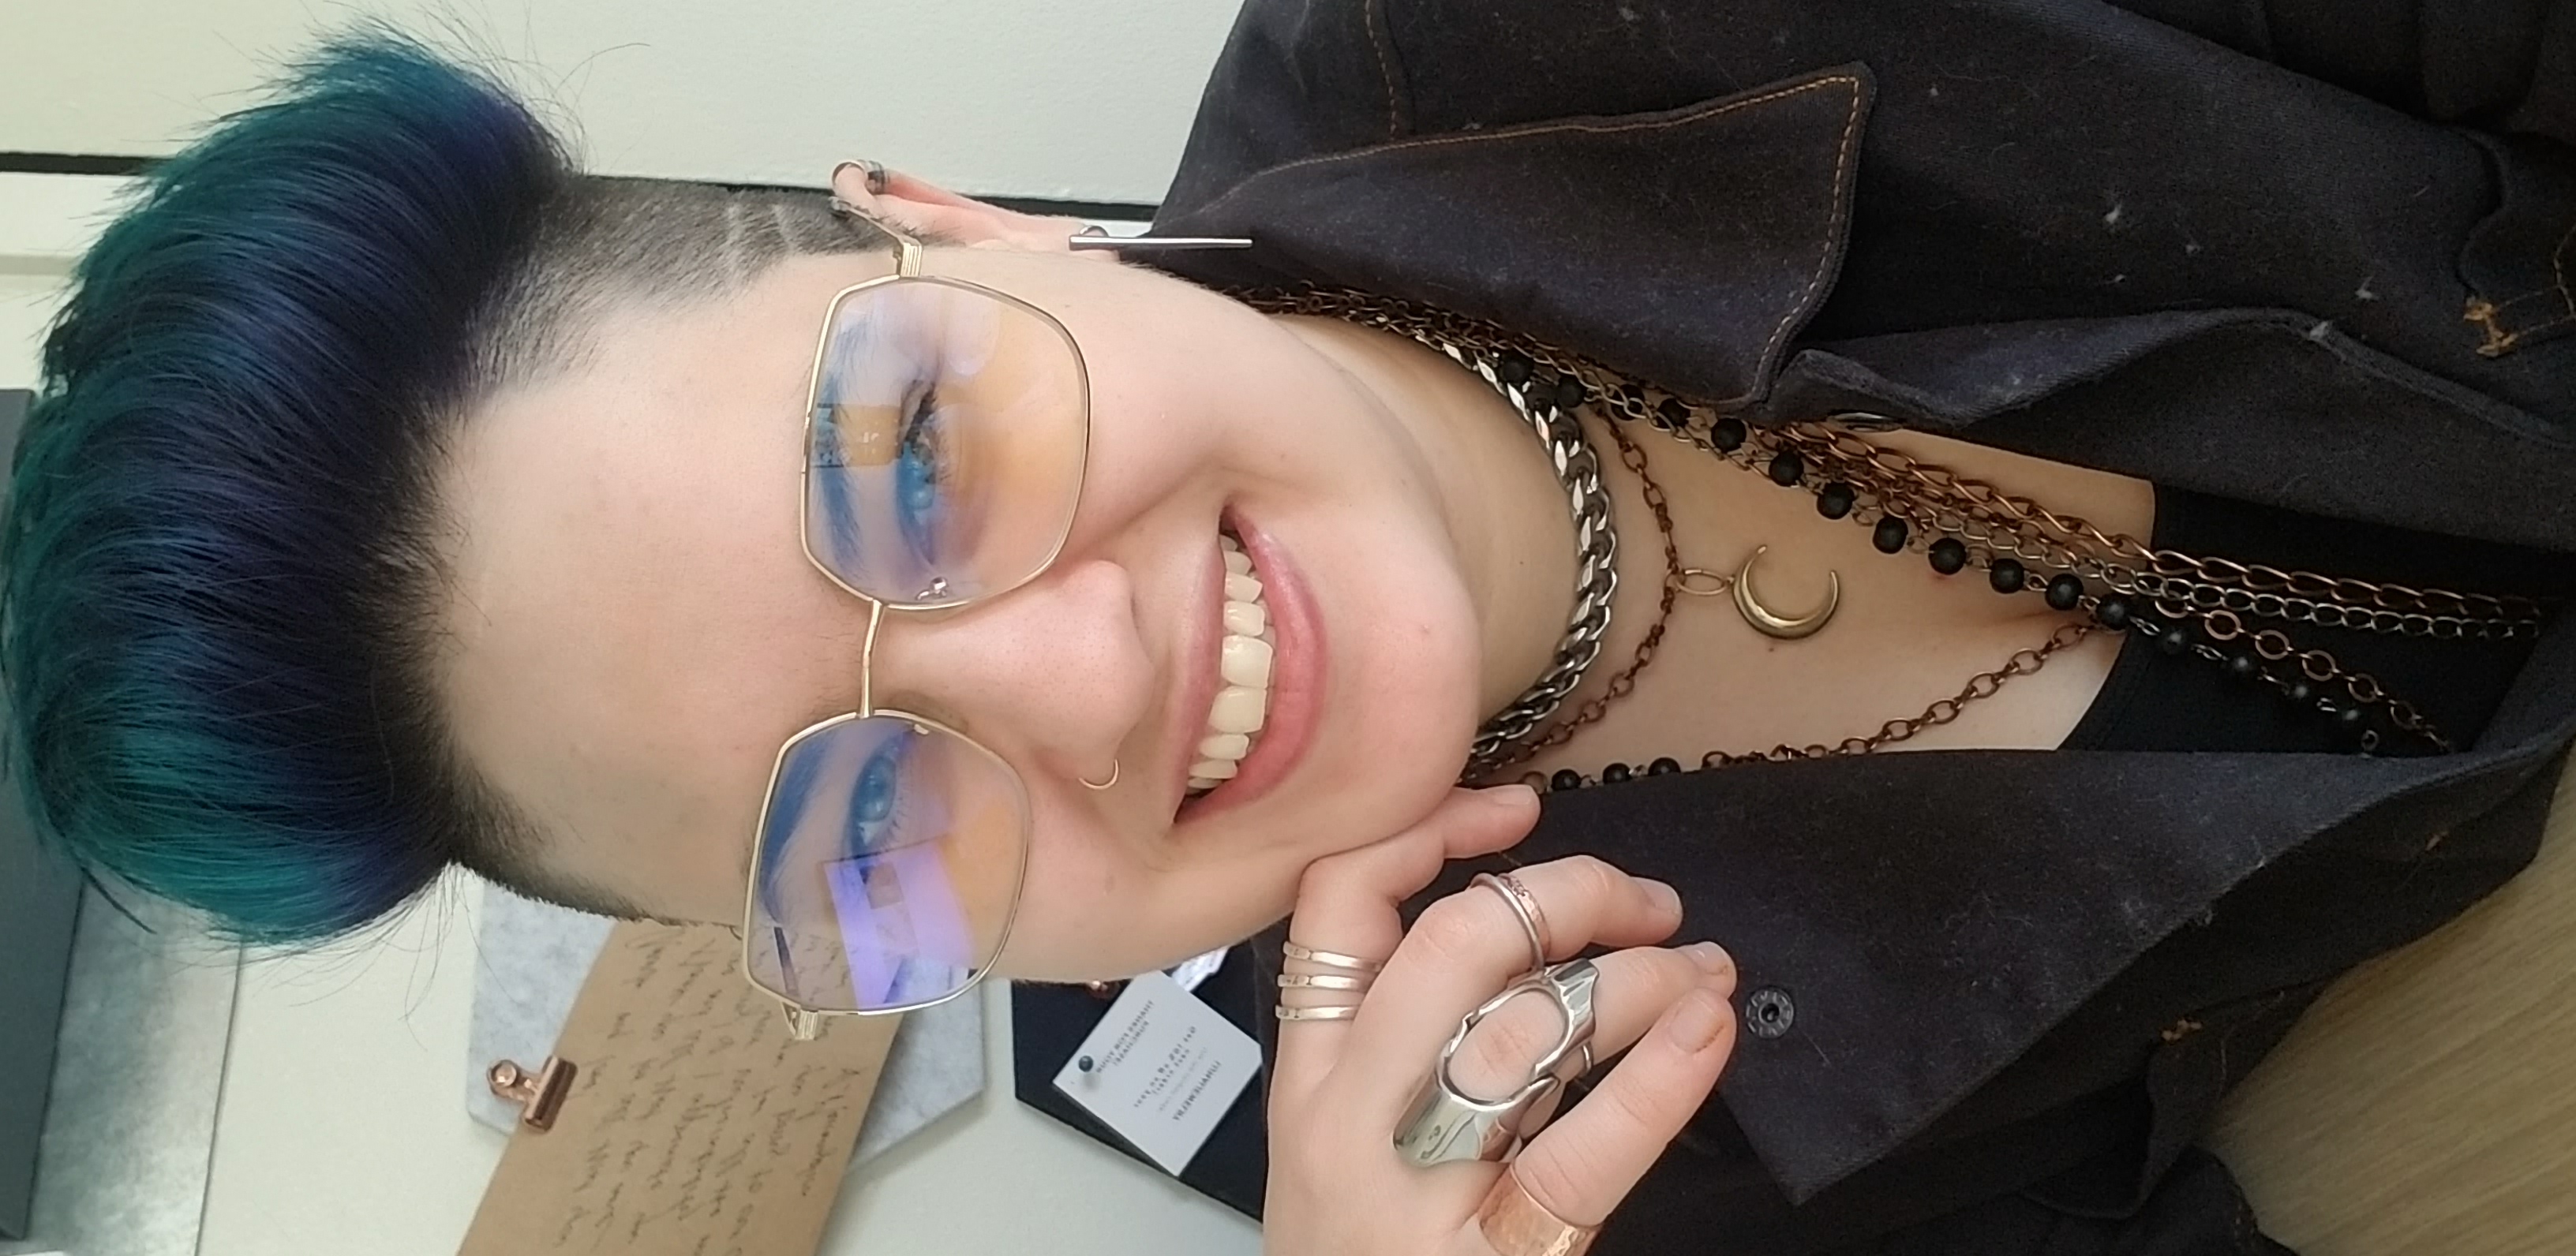 Photo of Ara Phoenixx, a nonbinary human with blue hair, glasses, and a variety of jewelry. Ara wears a dark jumpsuit, is sitting at a desk, and is smiling.